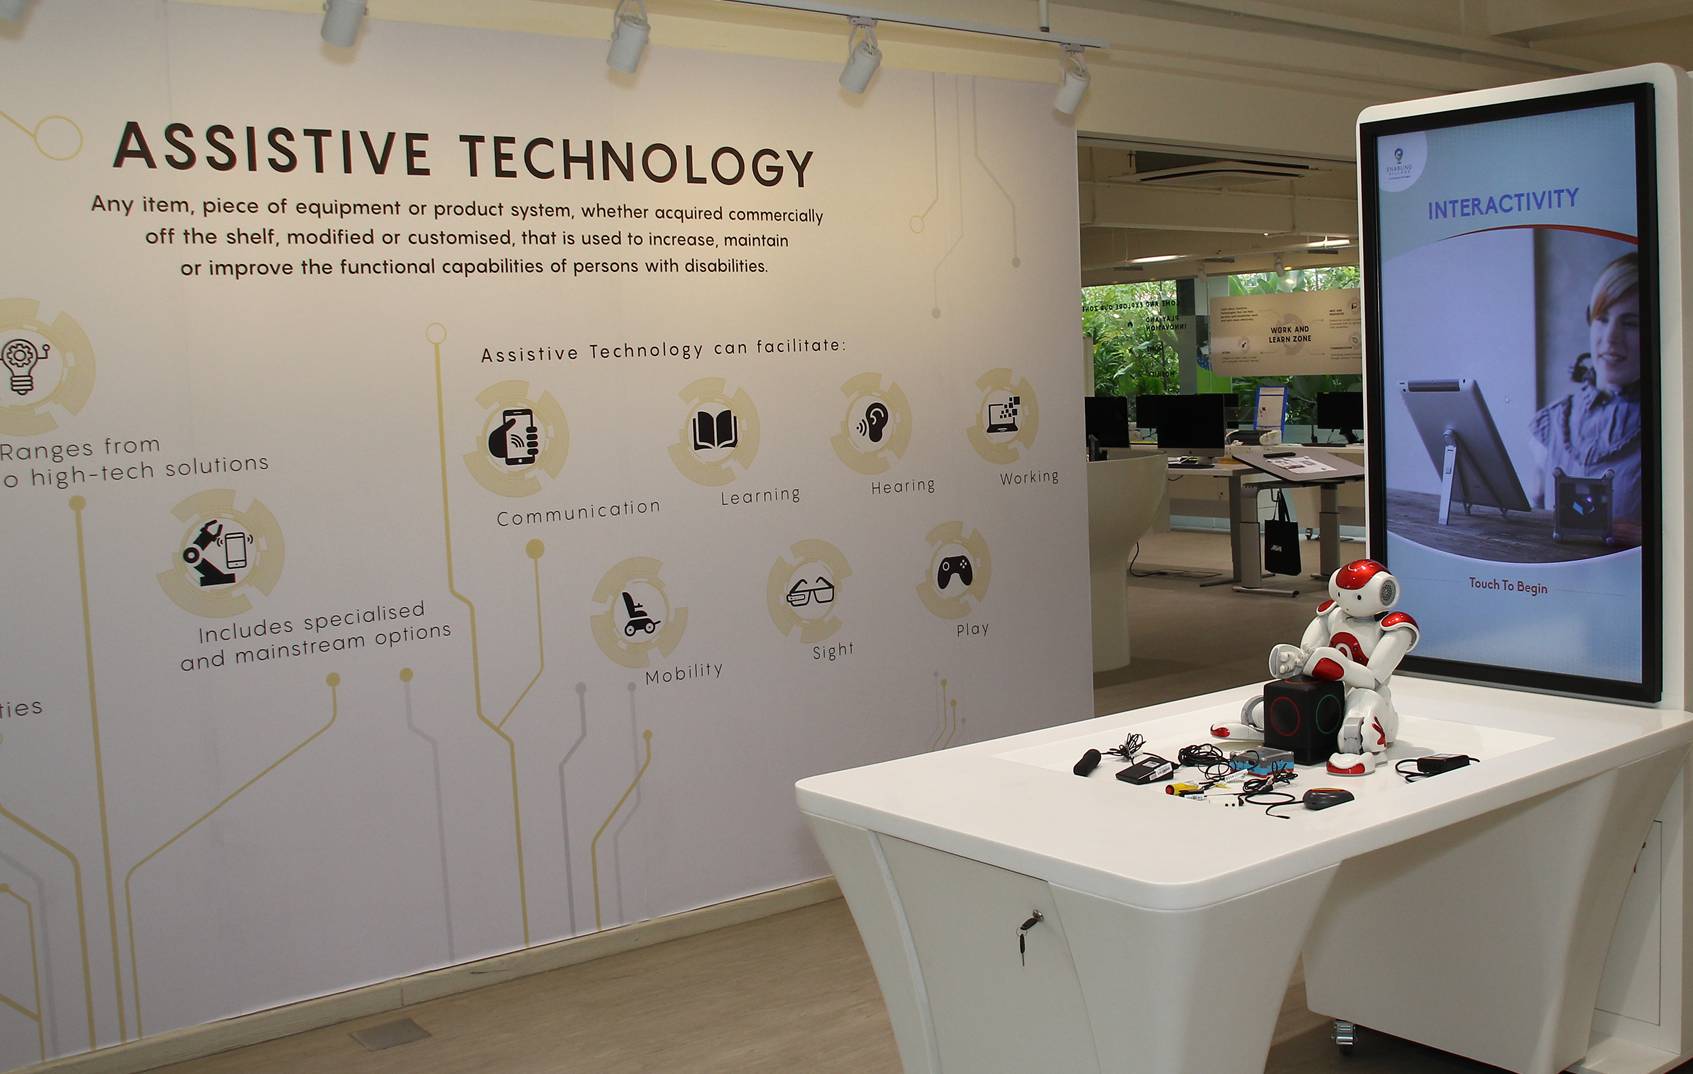 Interior of Tech Able showing digital screens and some assistive technology devices on display like a robot for self-exploration.